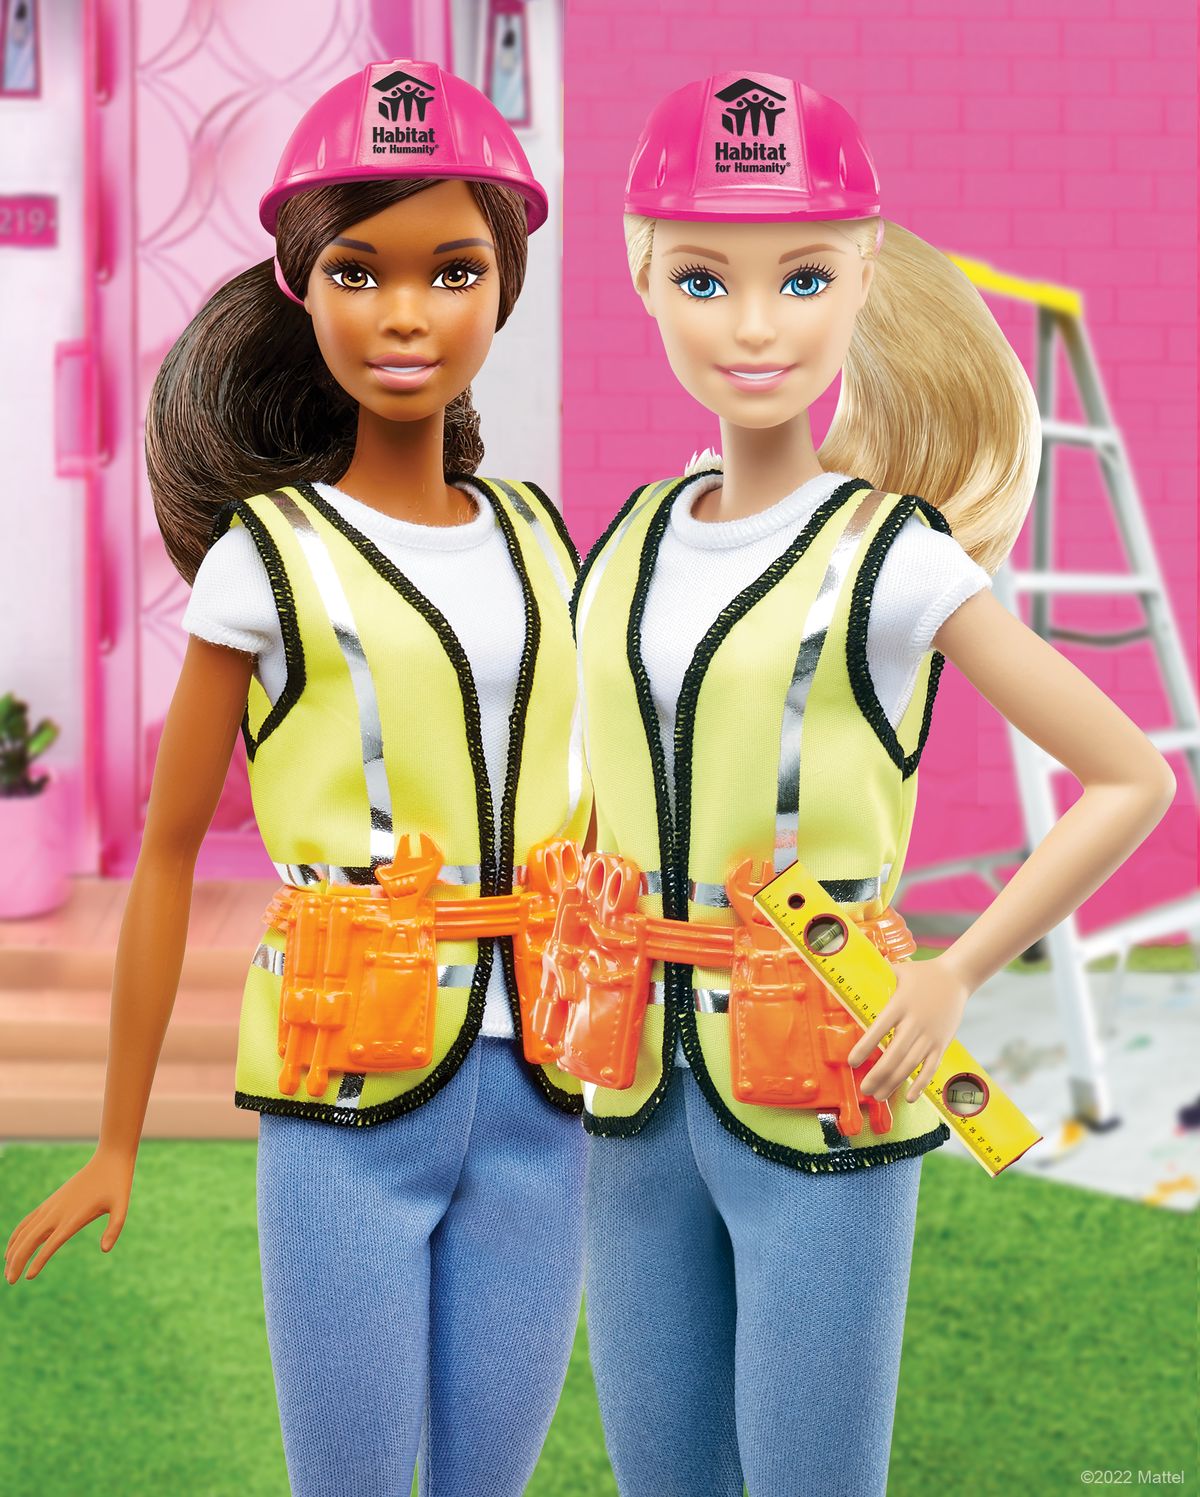 Koppeling Blaast op Condenseren Barbie Is Joining Forces With Habitat for Humanity to Complete 60 Projects  in 2022